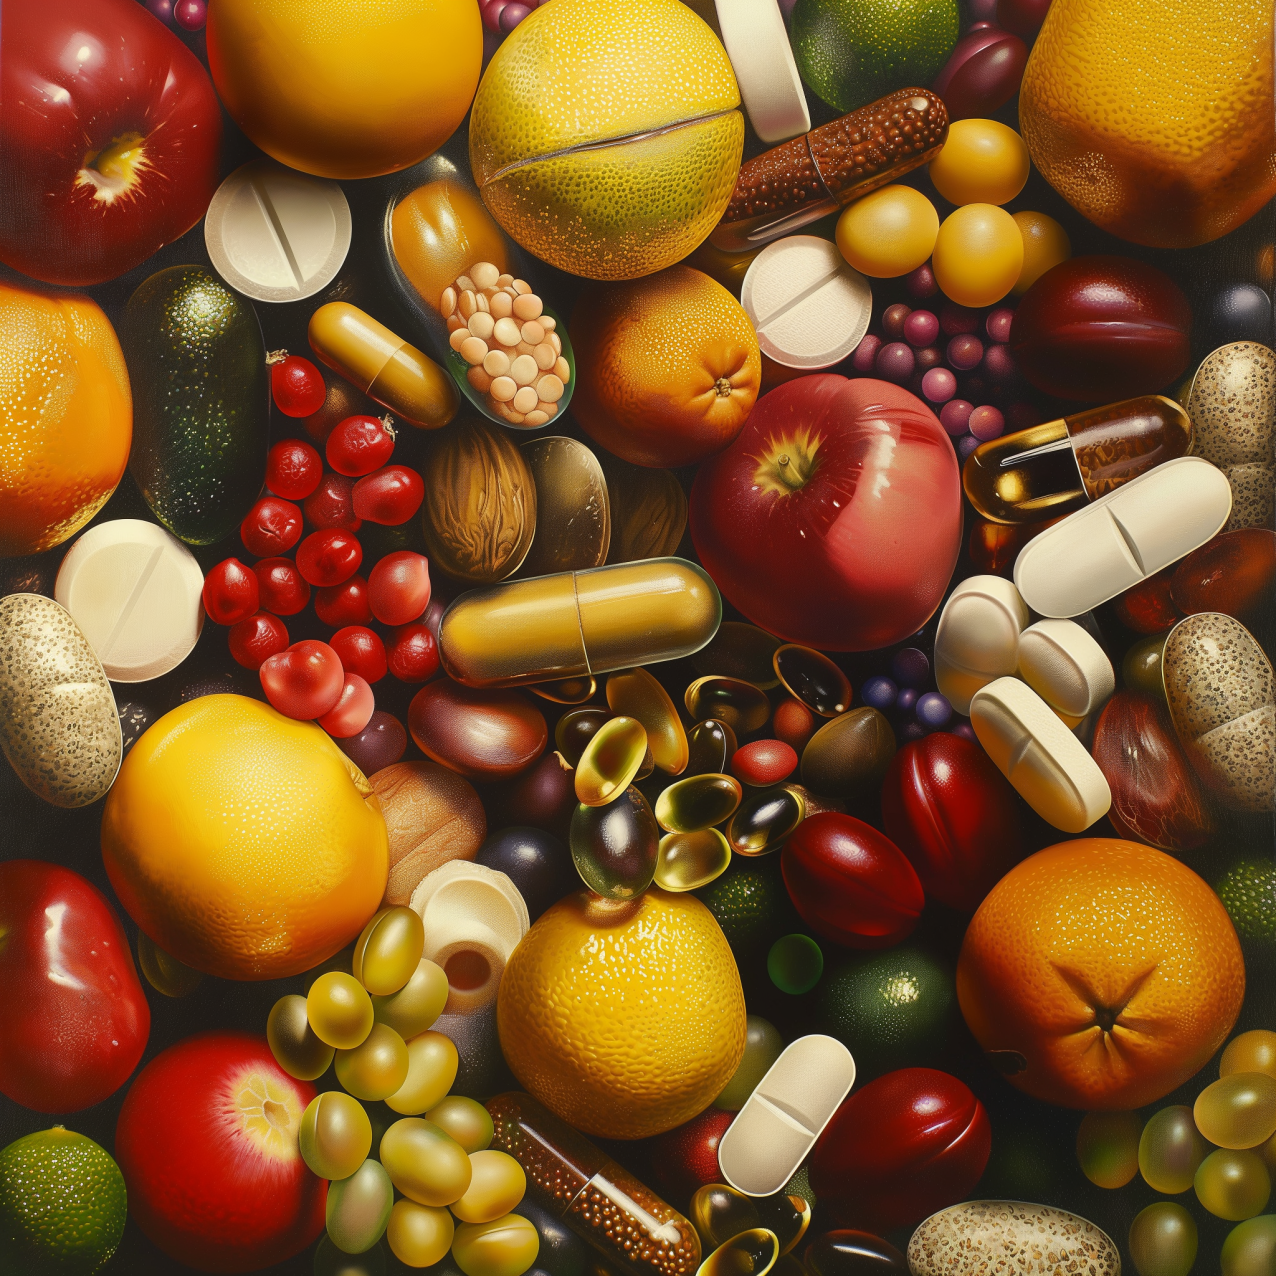 An animation of vitamins and foods that contain vitamins (fruits)